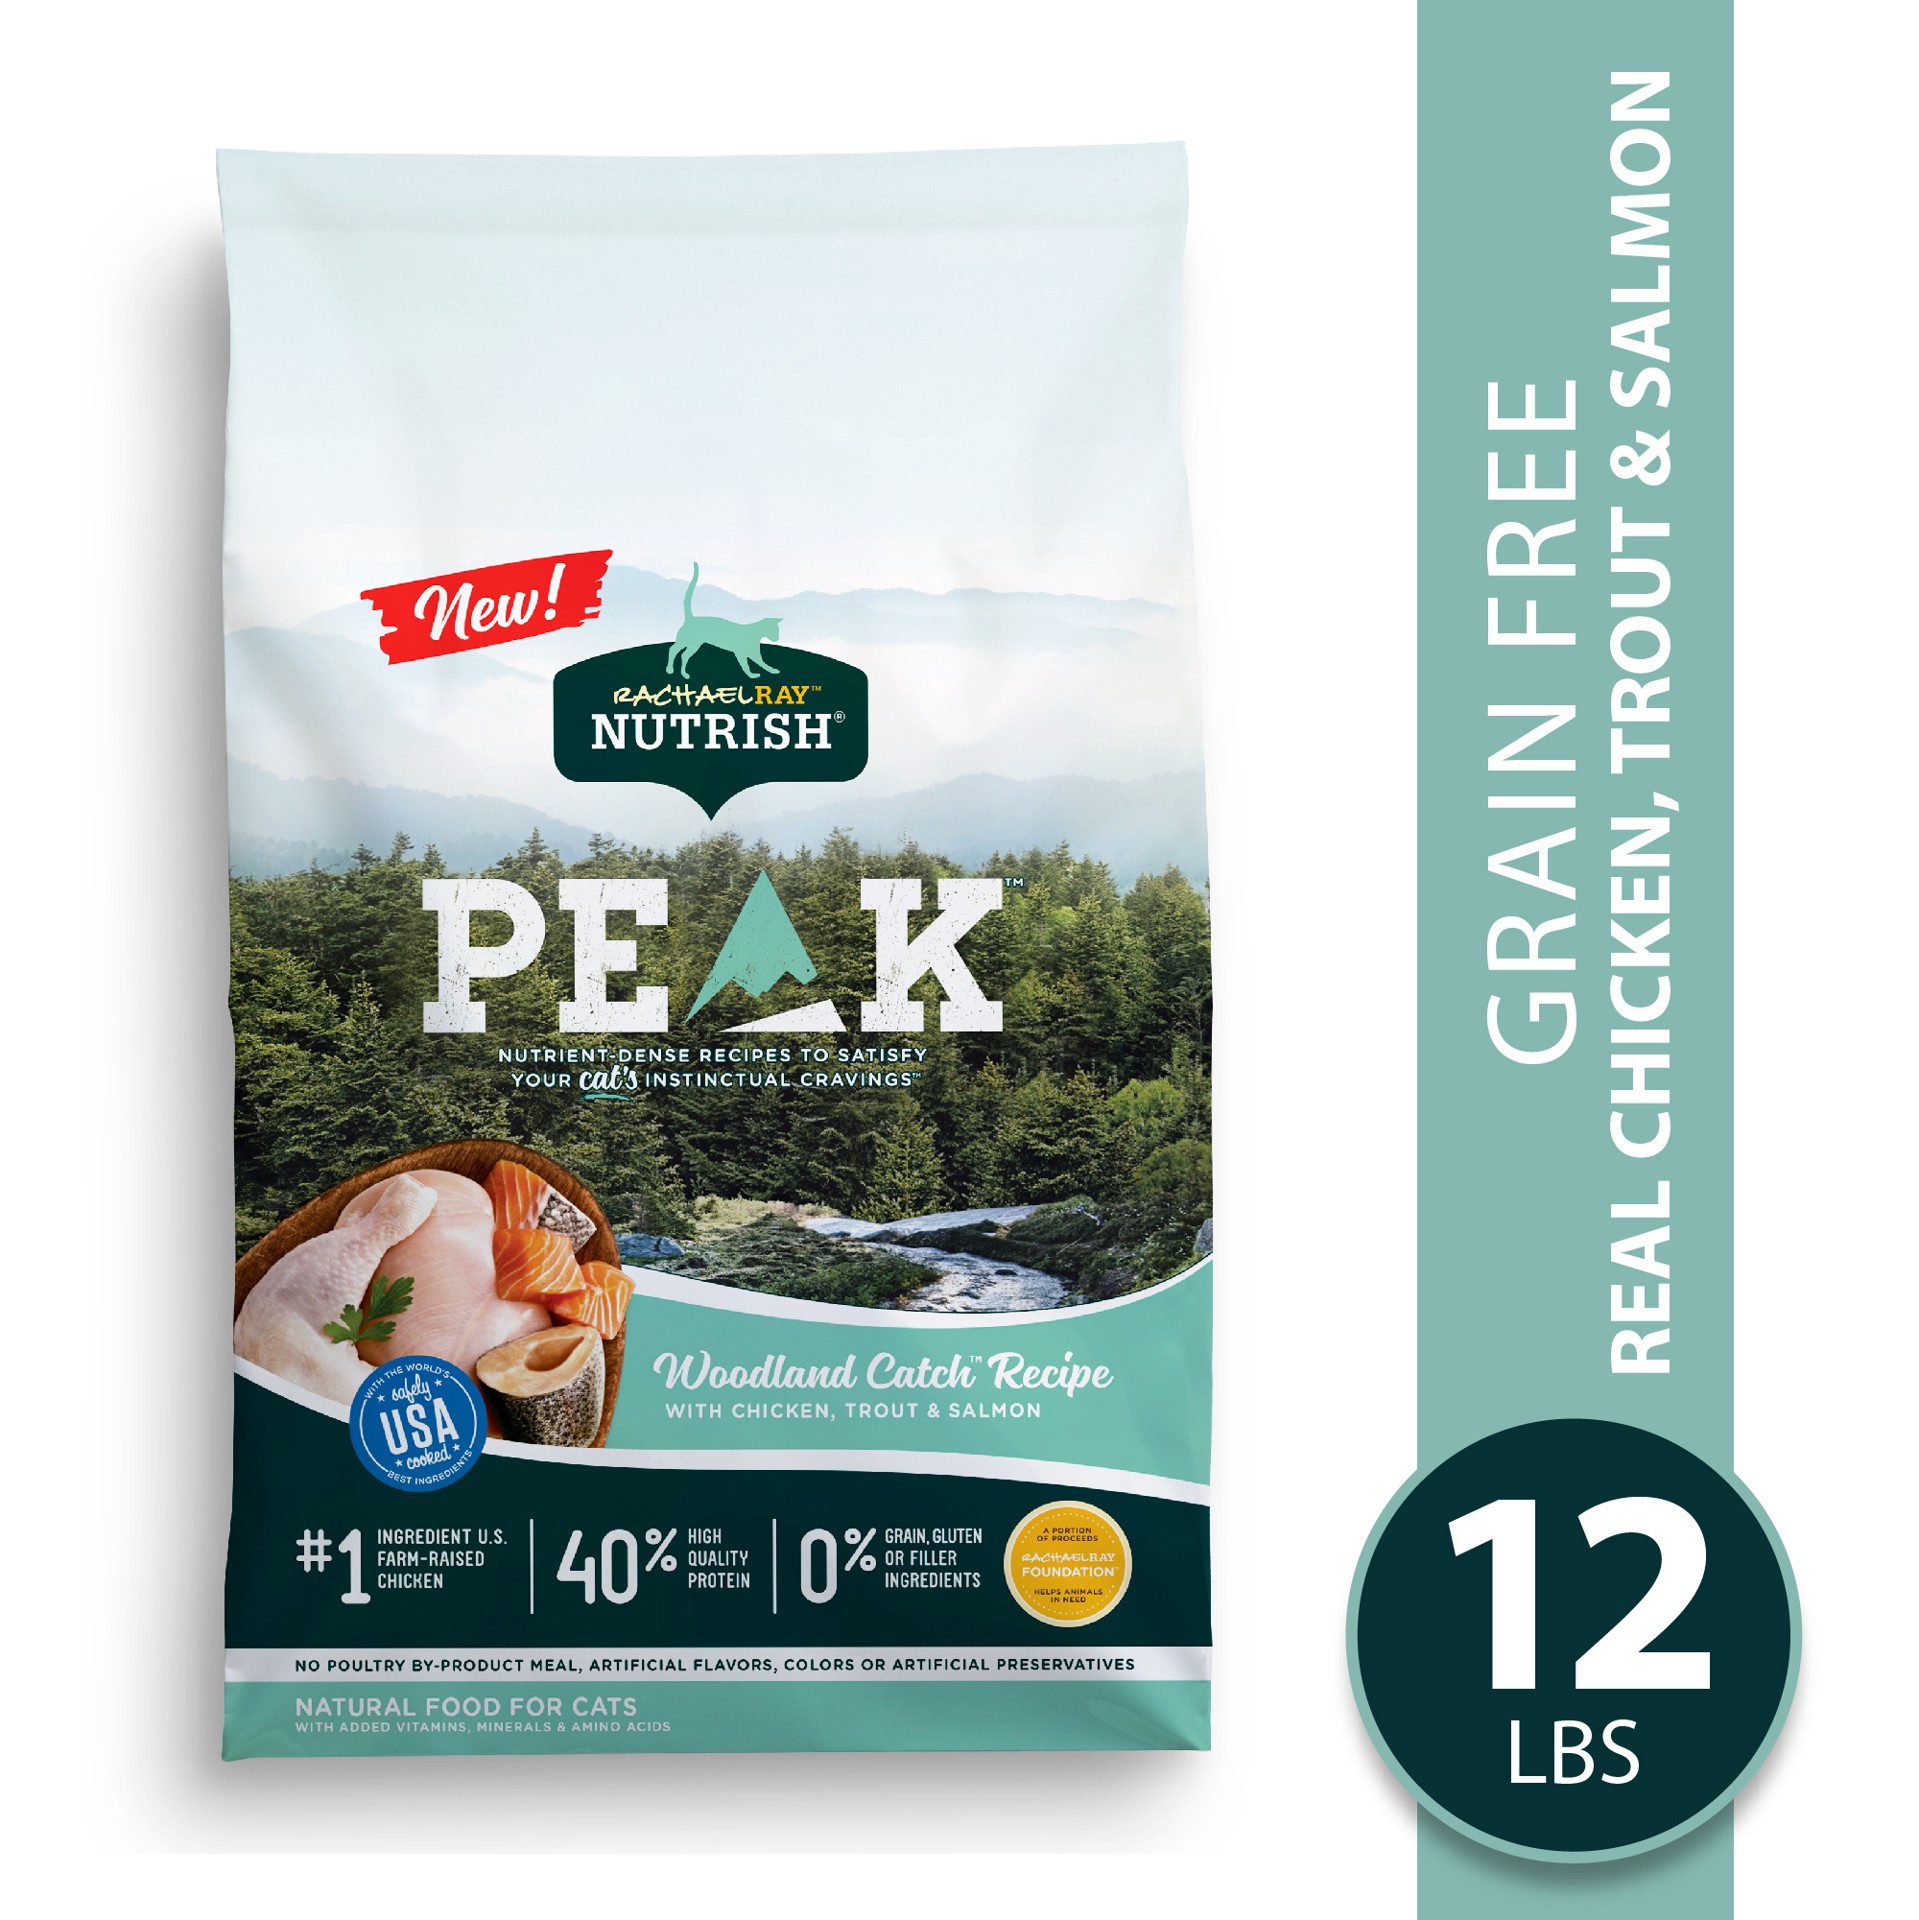 slide 4 of 4, Rachael Ray Nutrish PEAK Dry Cat Food, Grain Free Woodland Catch Recipe with Chicken, Trout & Salmon, 12lbs, 12 lb